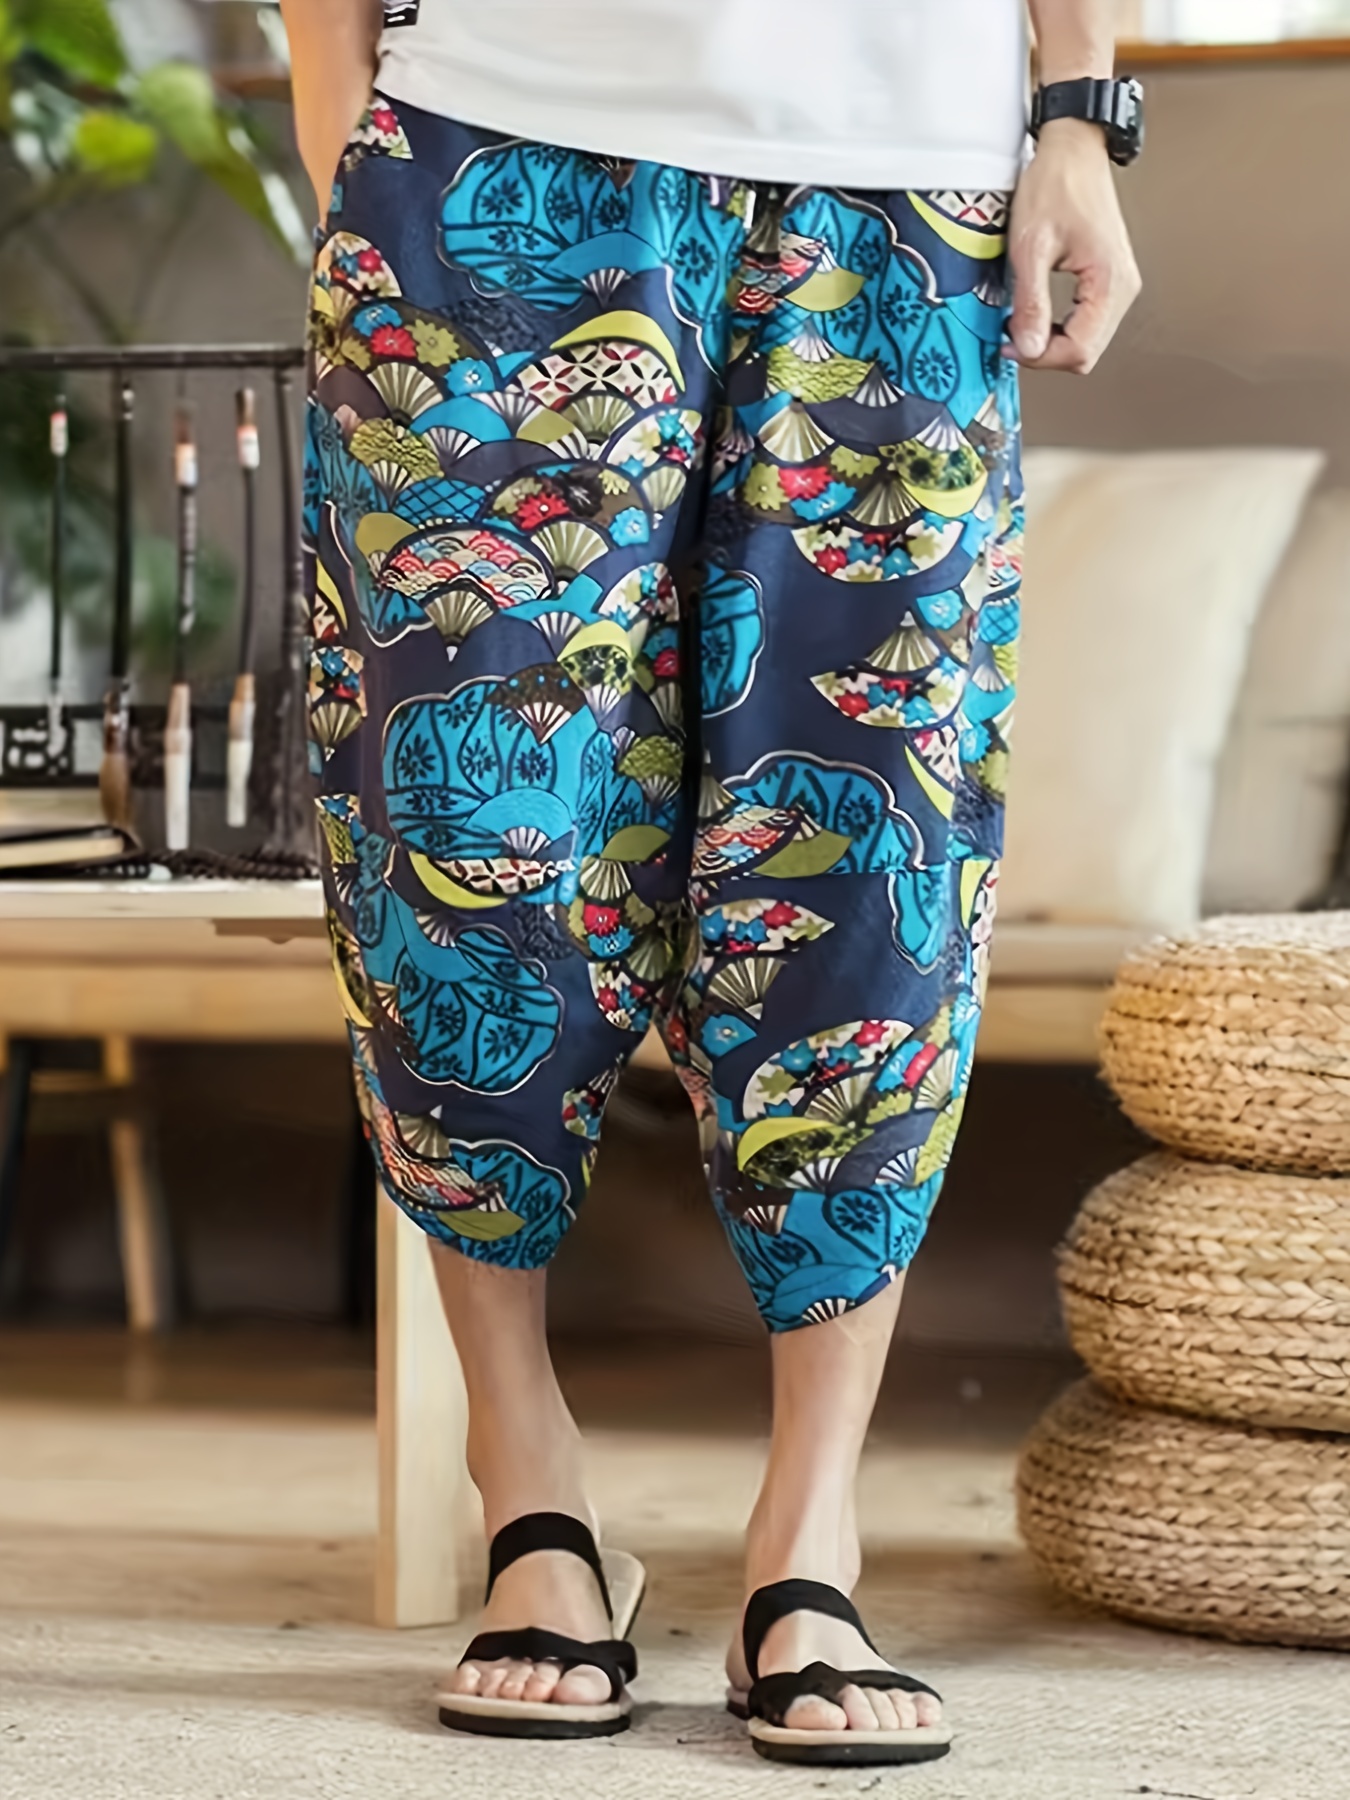 Men's Summer Casual Harem Pants With Print  Harem pants, Cotton harem pants,  Pants for women